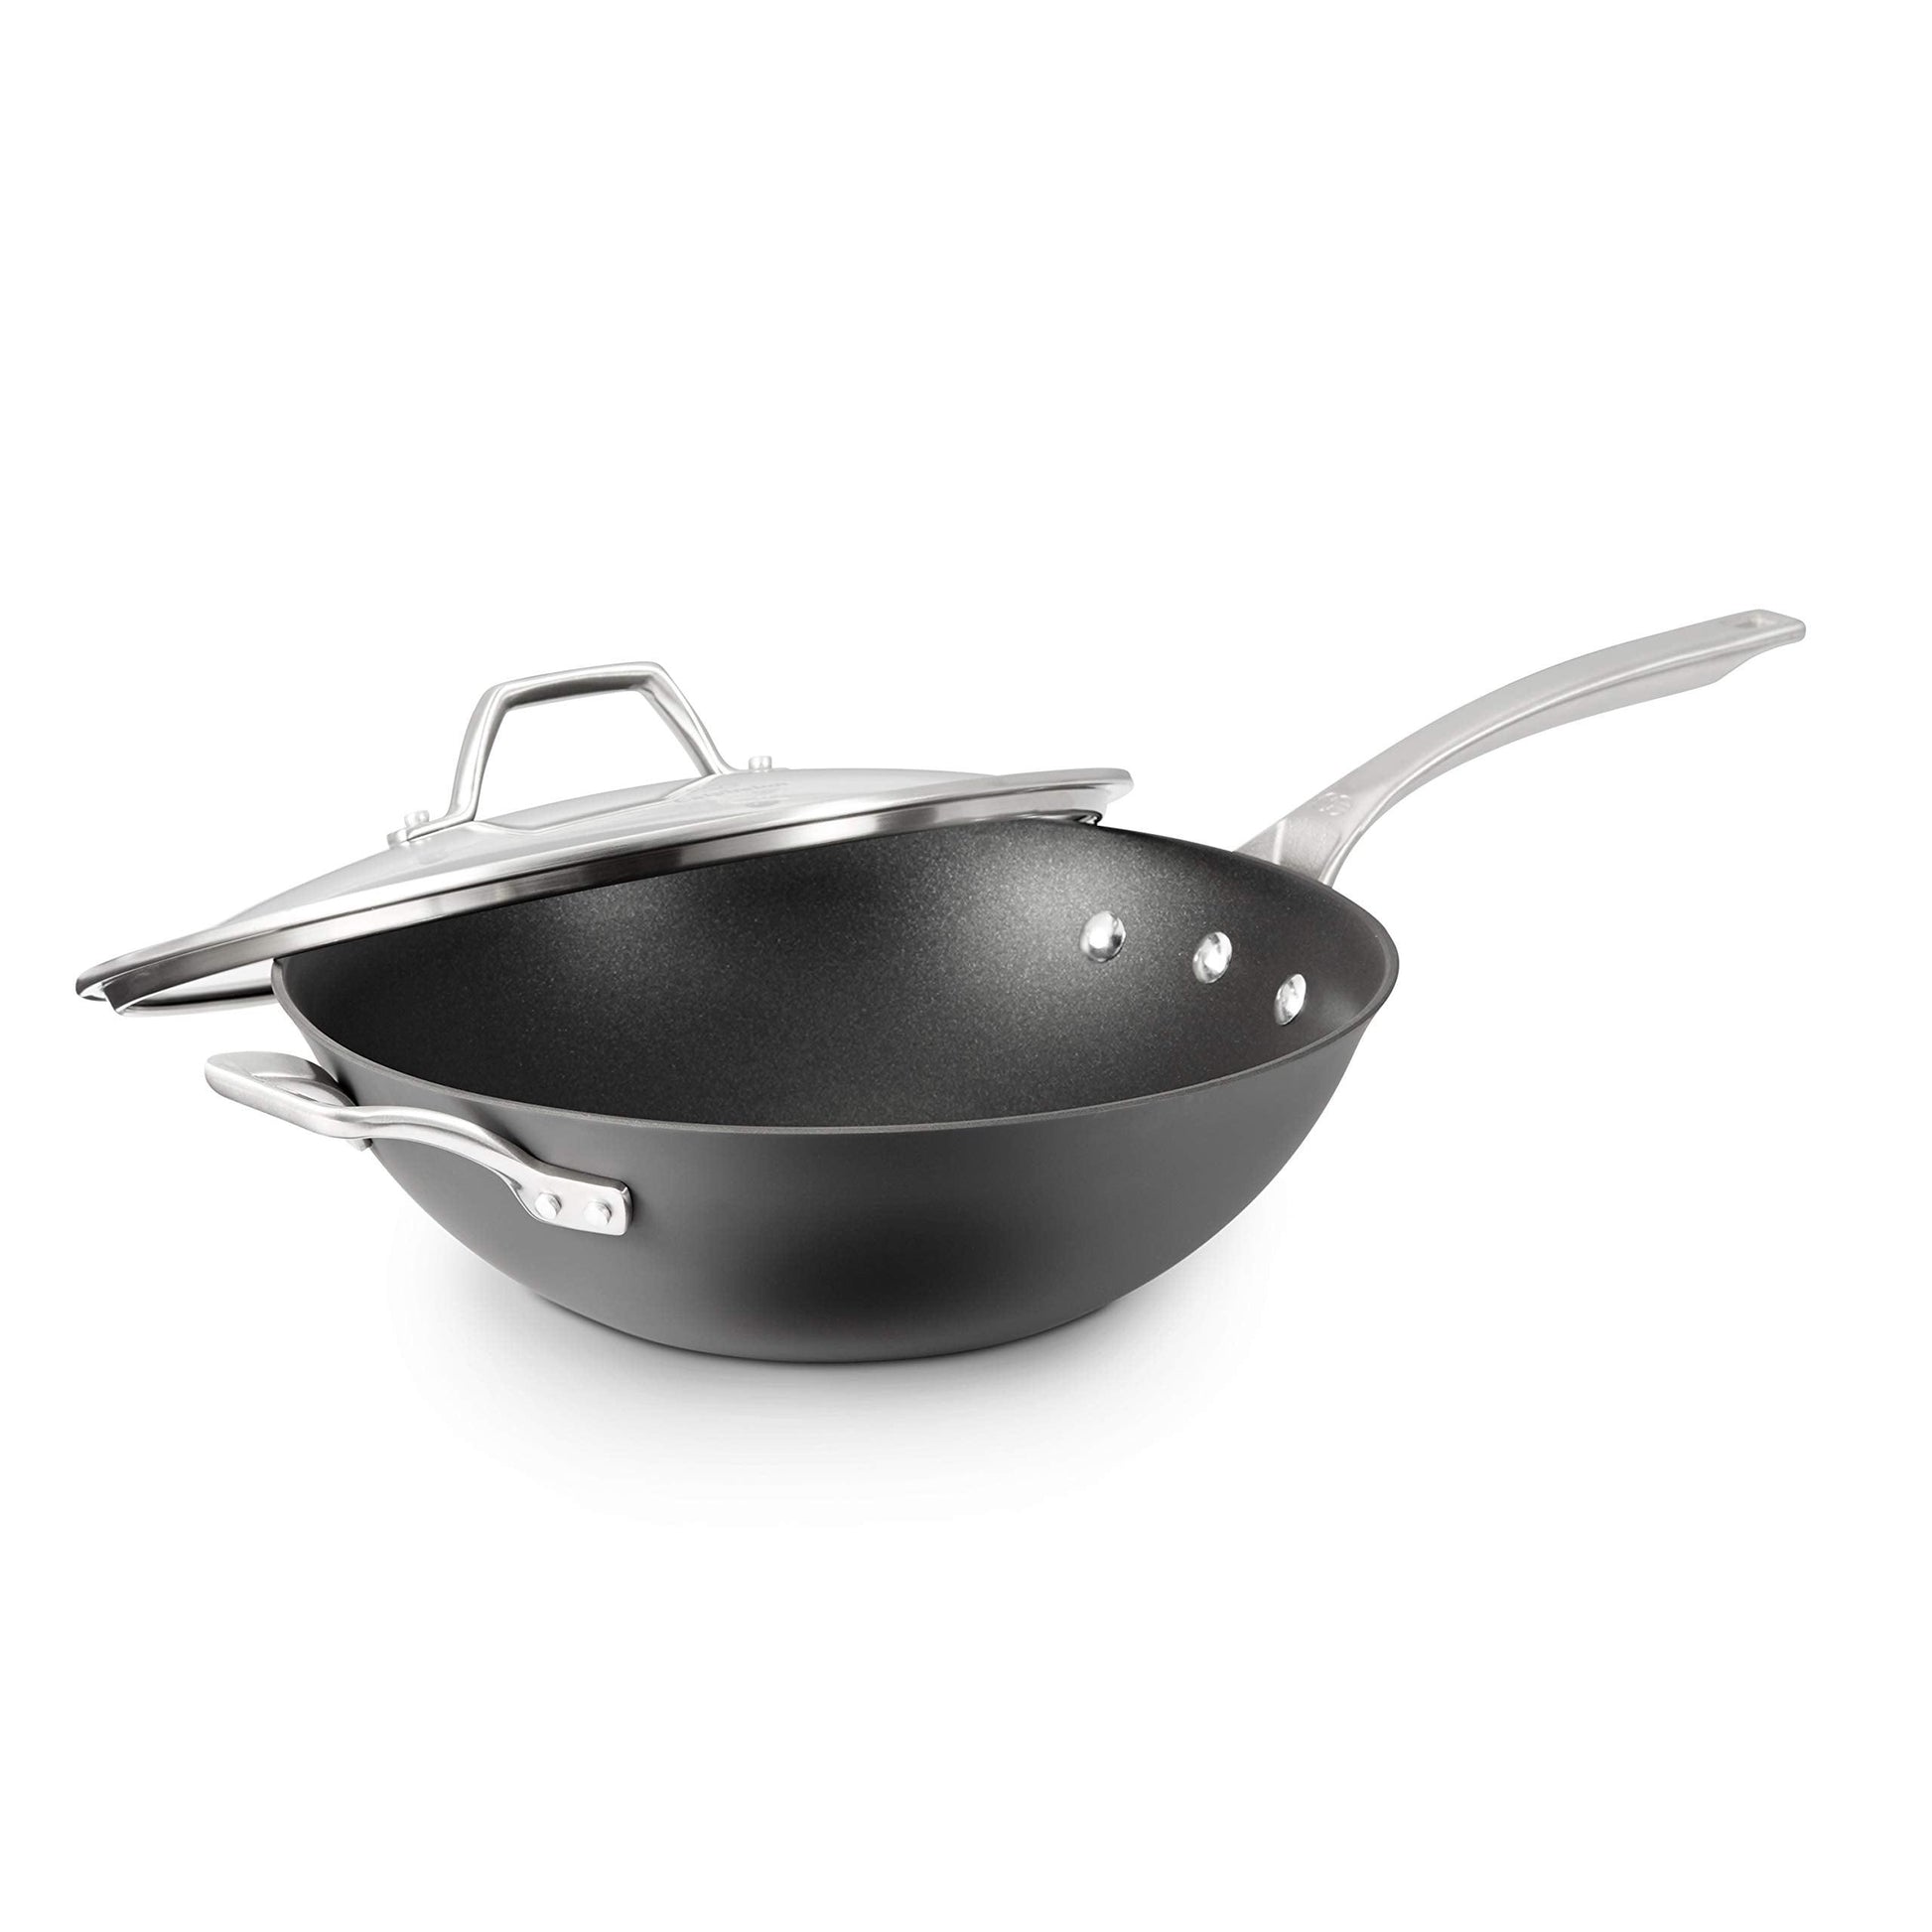 Calphalon Signature Hard-Anodized Nonstick 12-Inch Flat Bottom Wok with Cover - CookCave